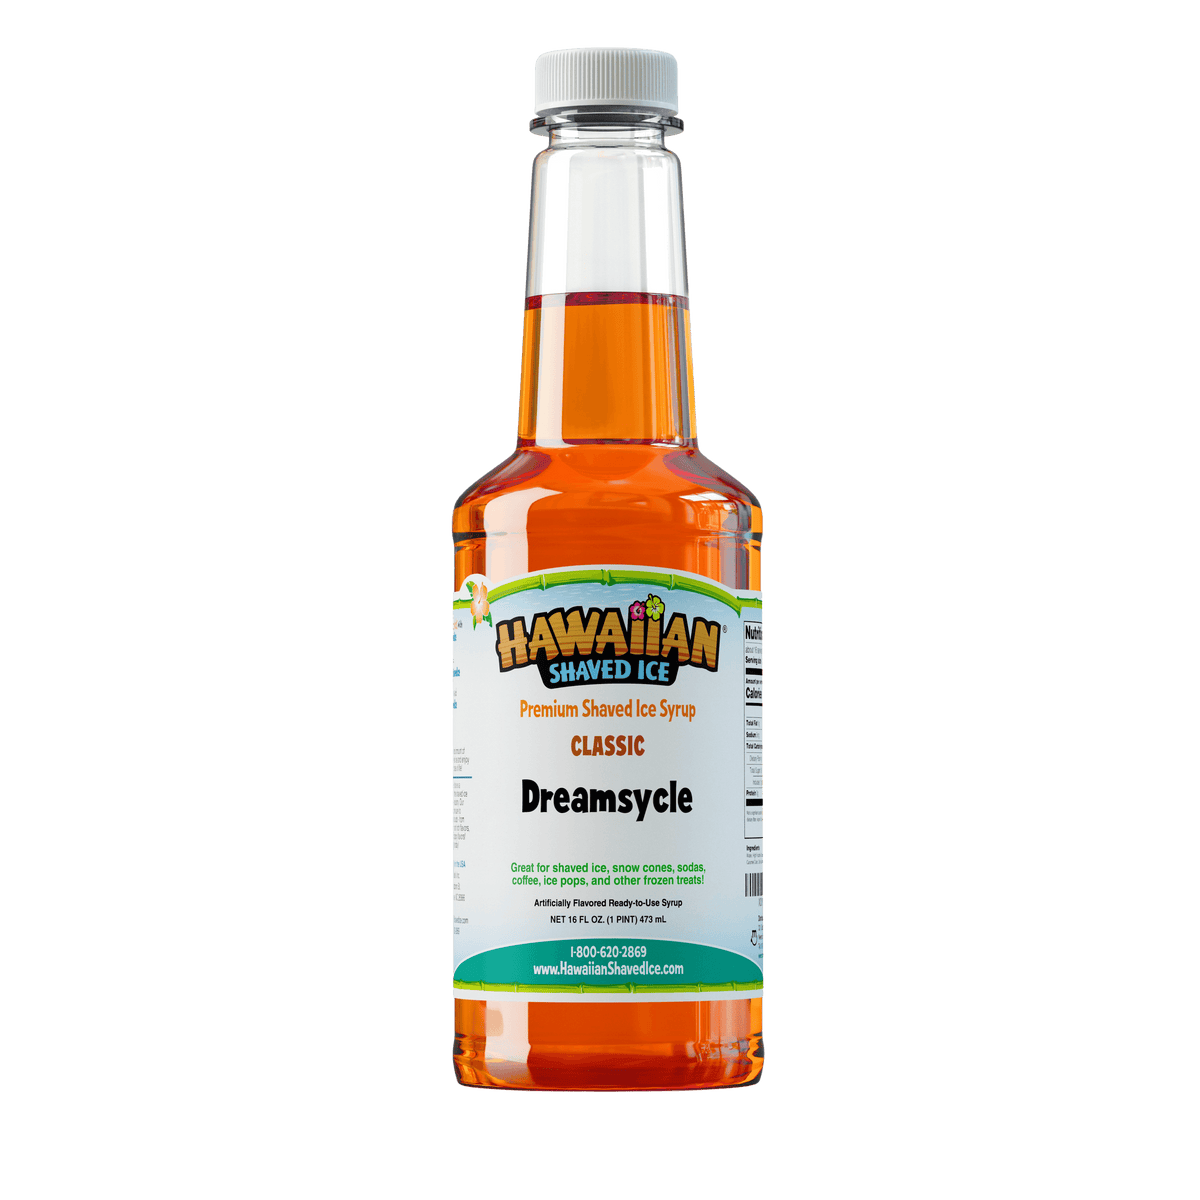 A pint (16-oz) of Hawaiian Shaved Ice Dreamscyle Flavored syrup, Orange